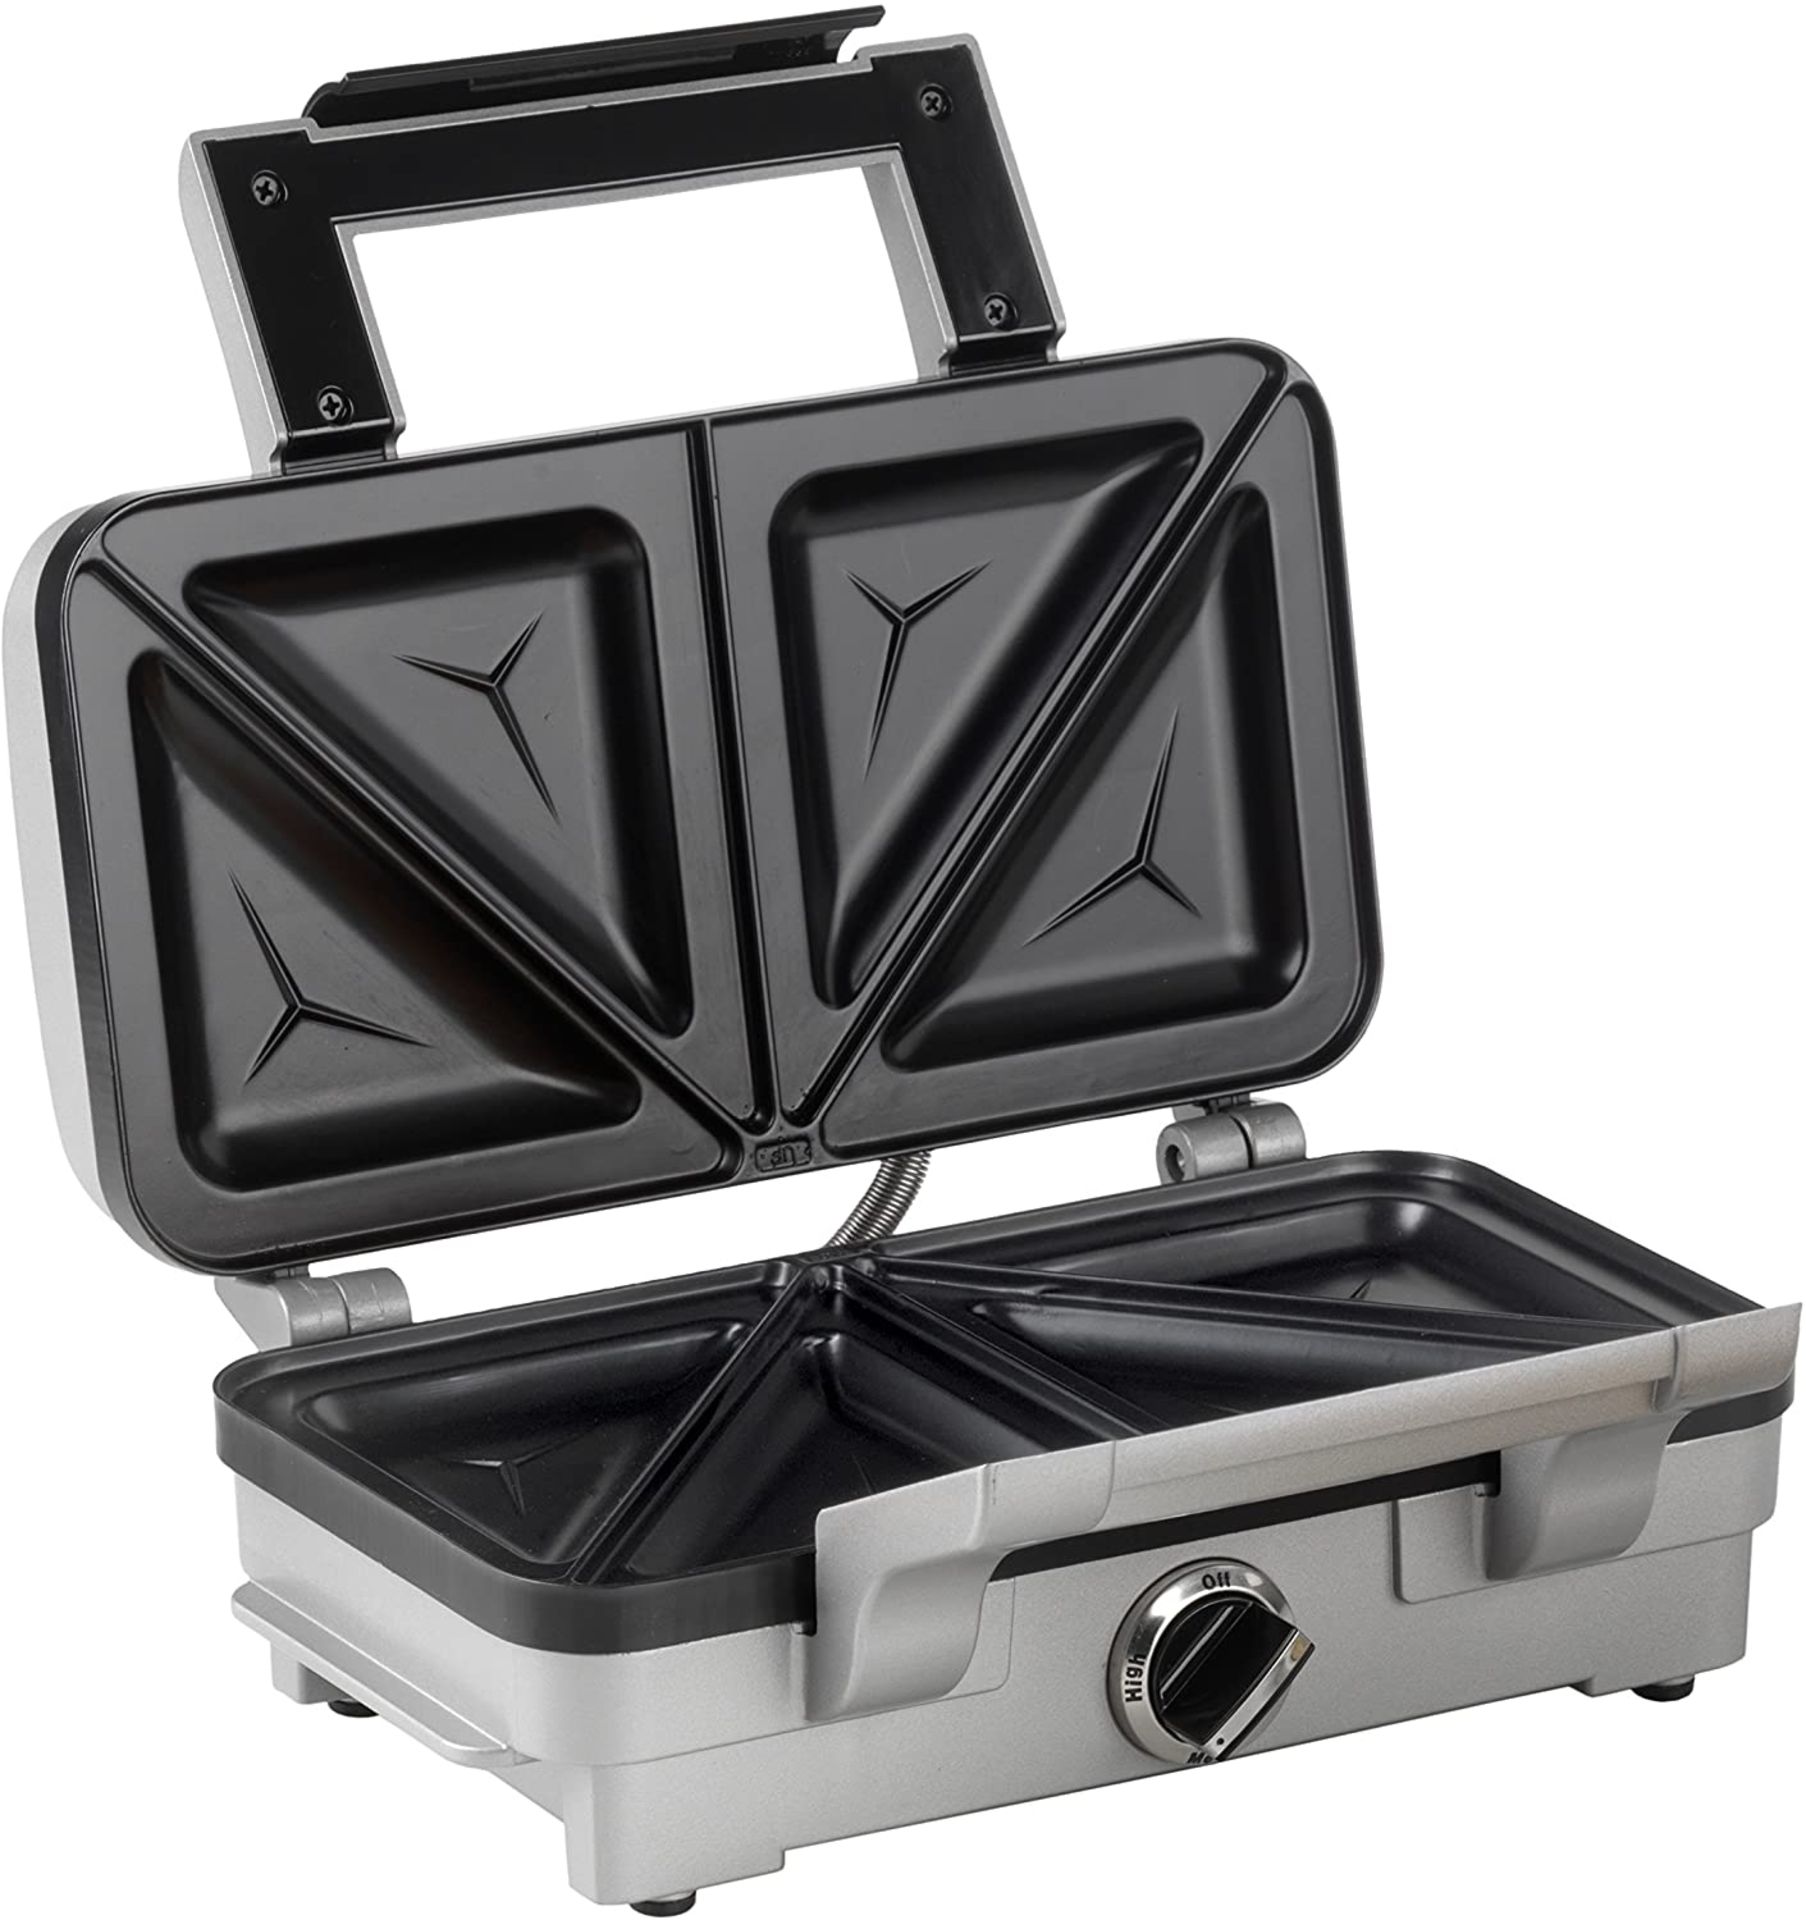 (M61) Cuisinart 2-in-1 Sandwich and Waffle Maker, 1000 W - Silver Extra large sandwich plates w...